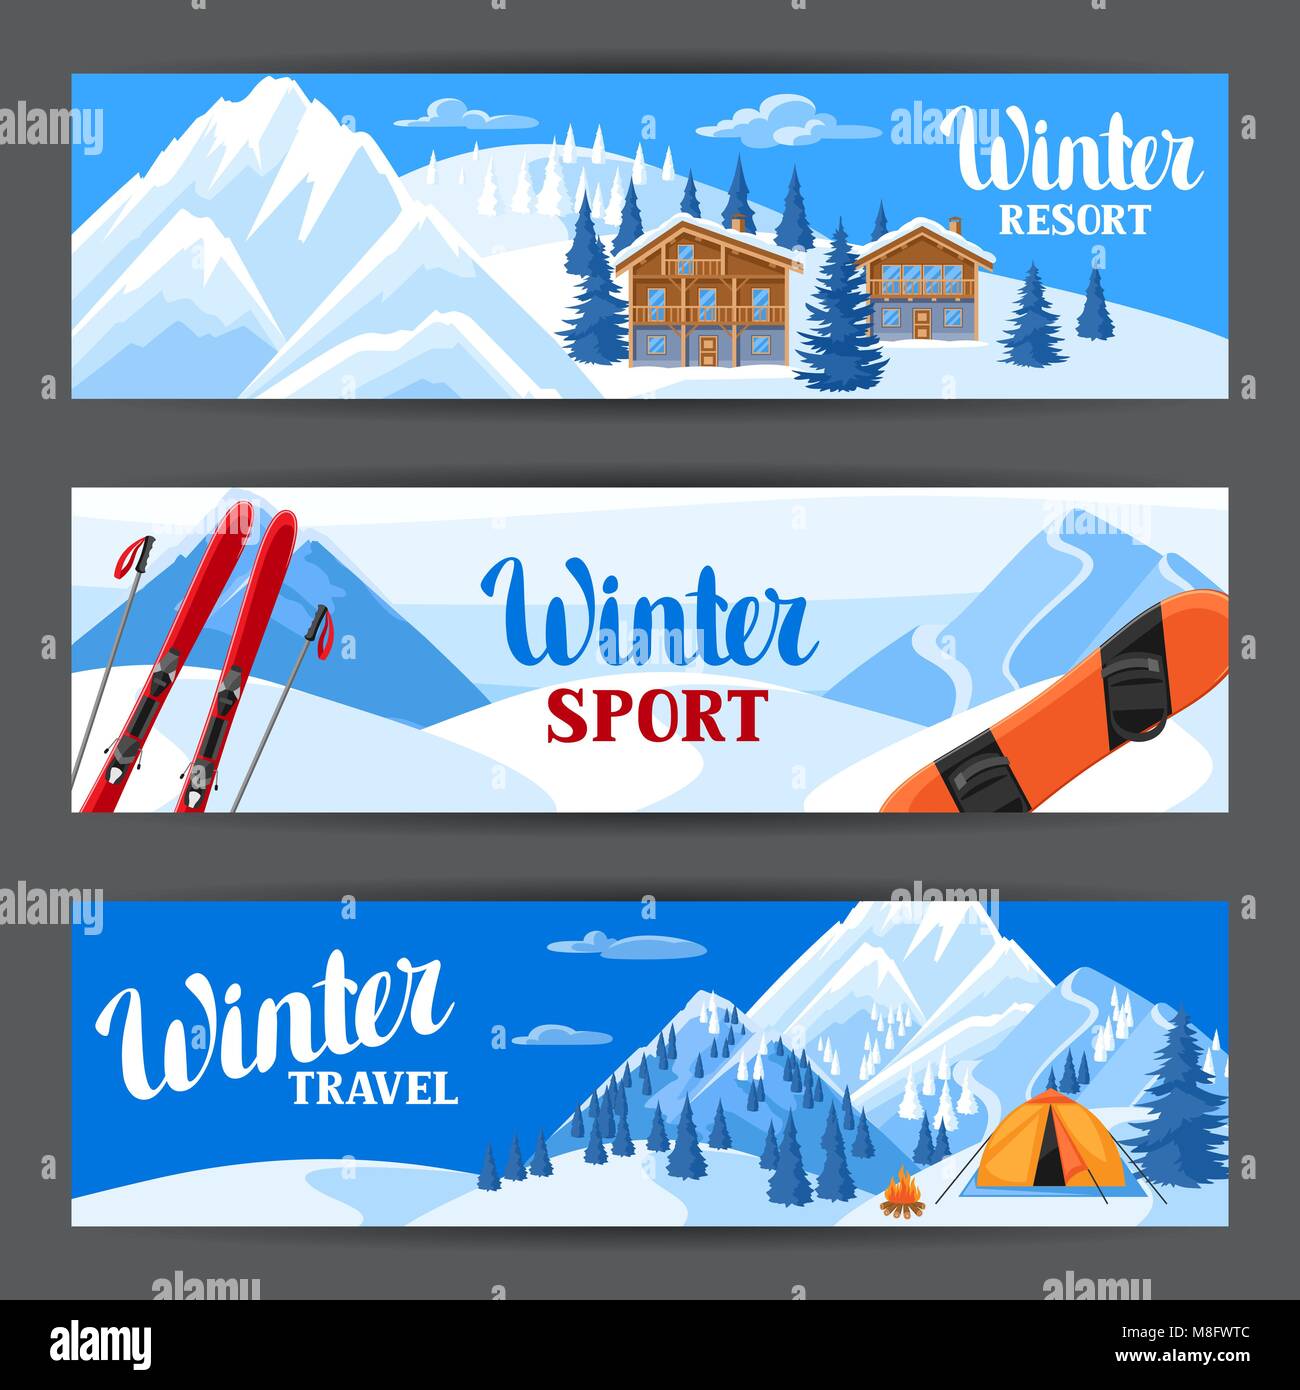 Winter ski resort banners. Beautiful landscape with alpine chalet houses, snowboard, snowy mountains and fir forest Stock Vector